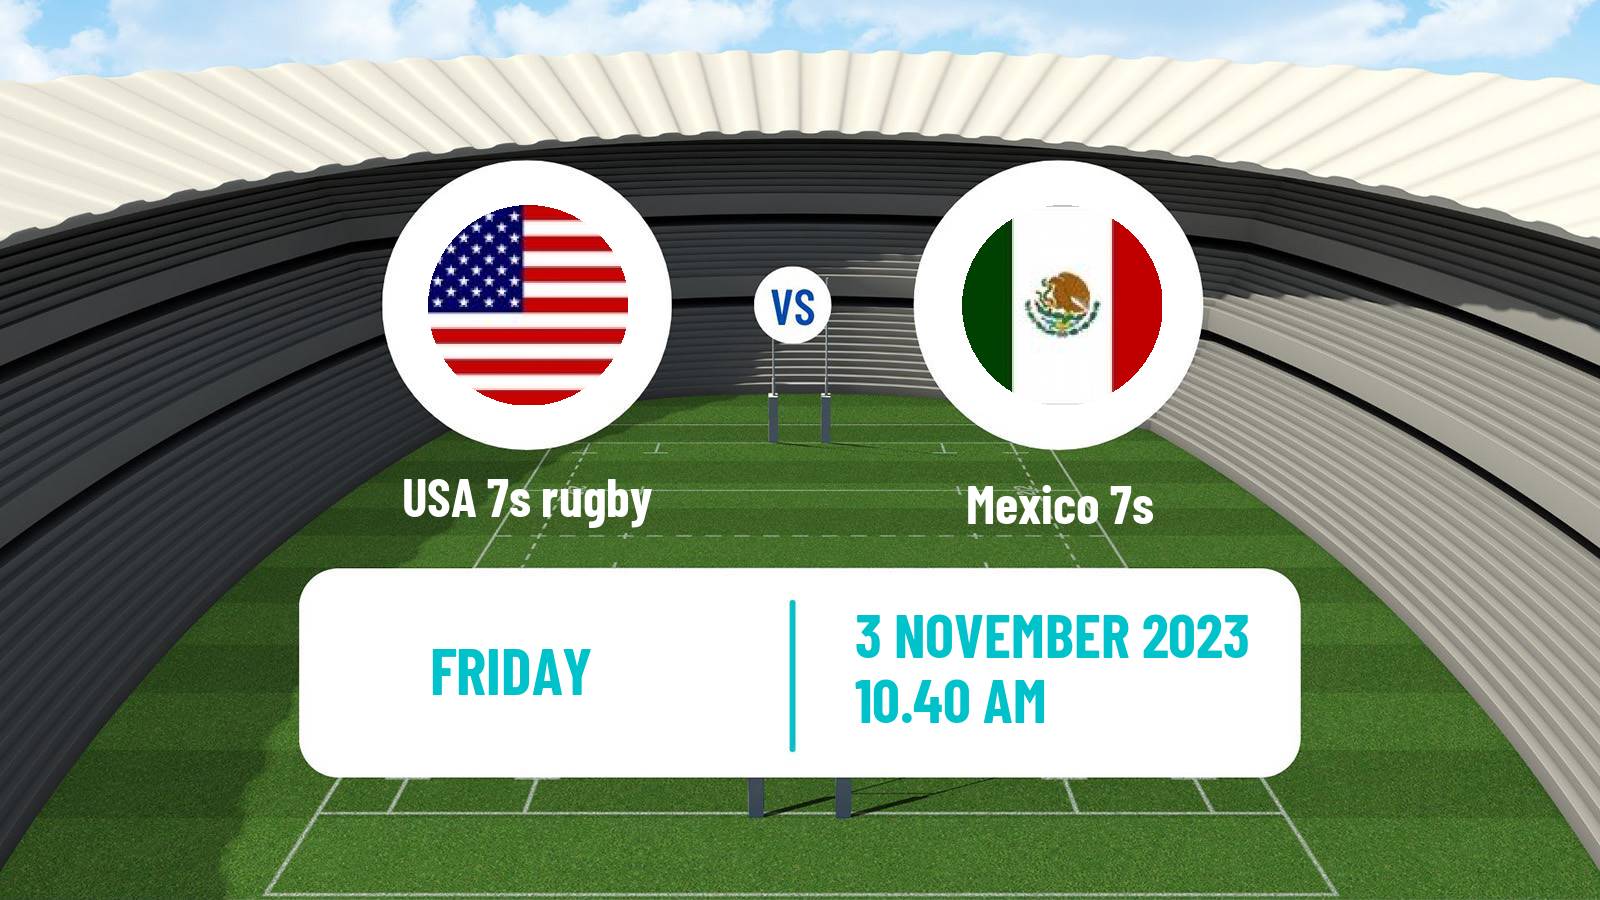 Rugby union Pan American 7s Rugby USA 7s - Mexico 7s